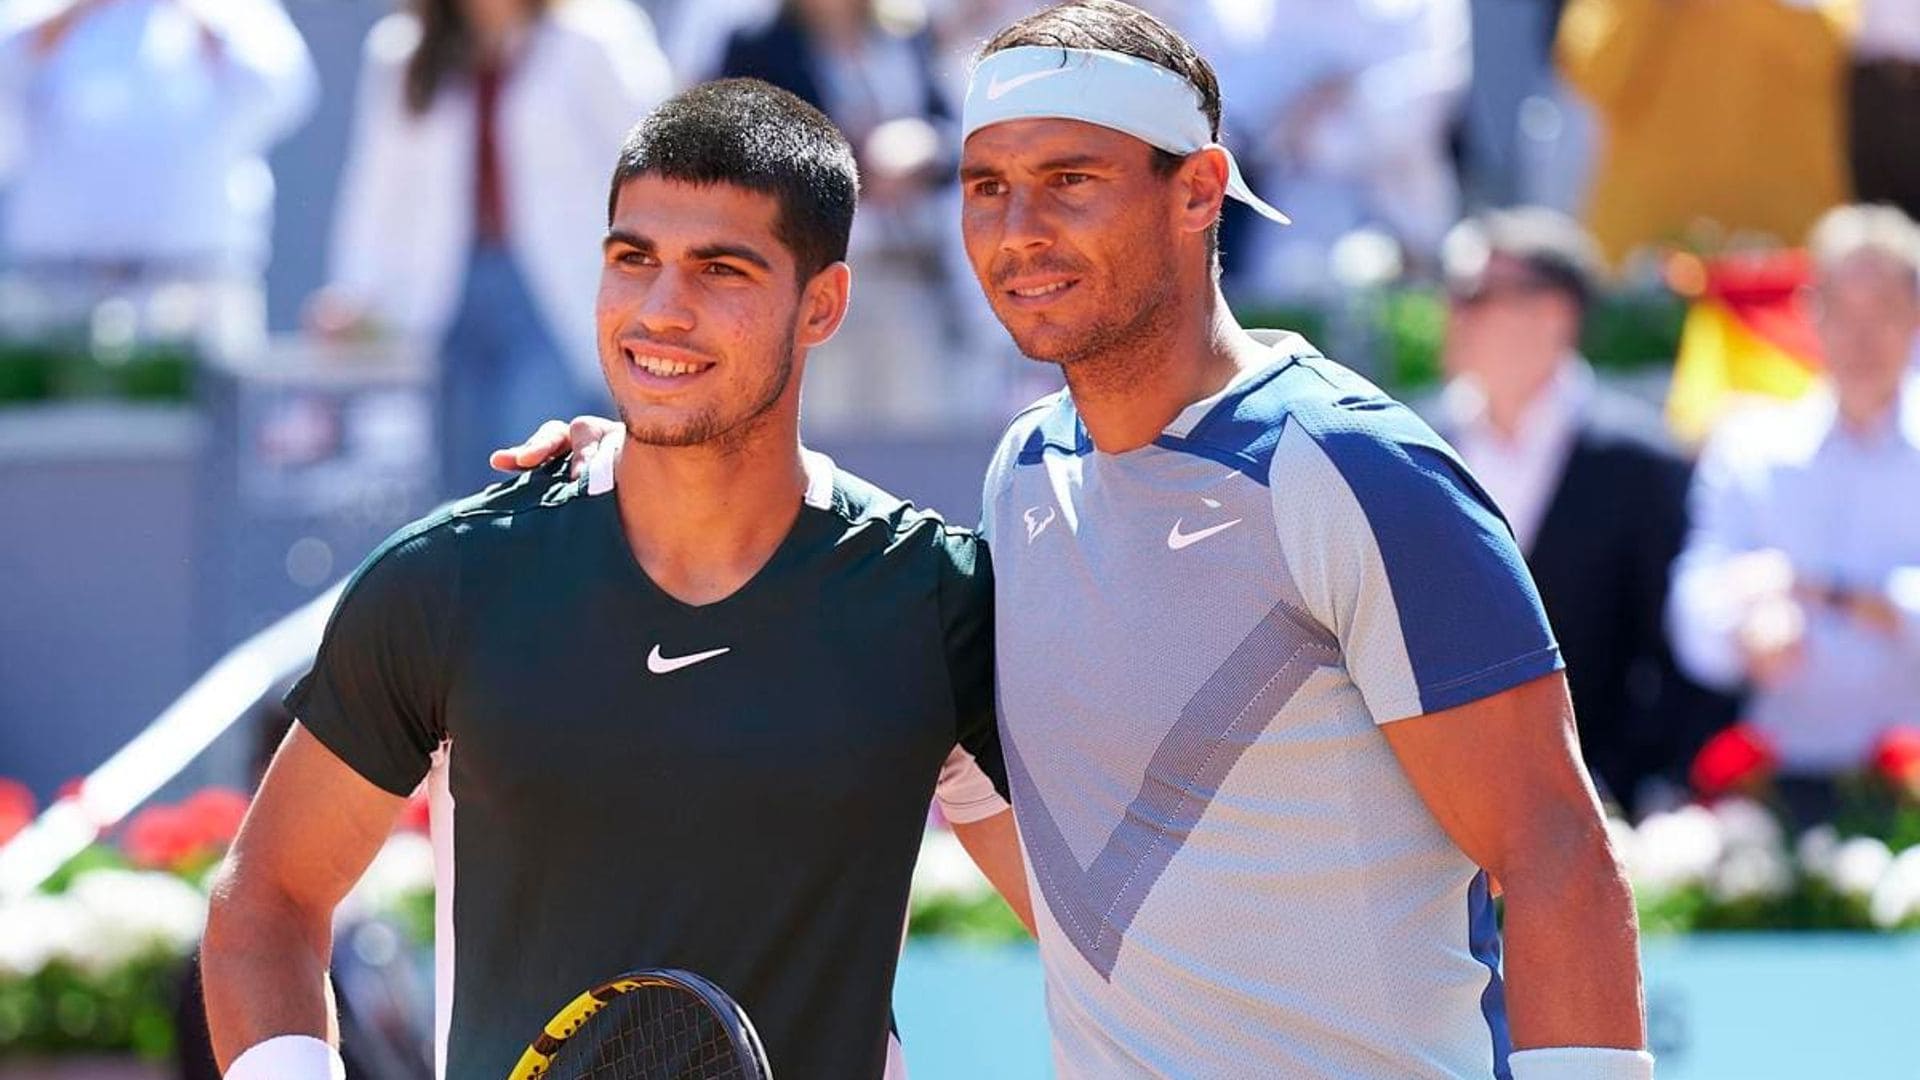 Watch Rafael Nadal and Carlos Alcaraz get ready for their upcoming match